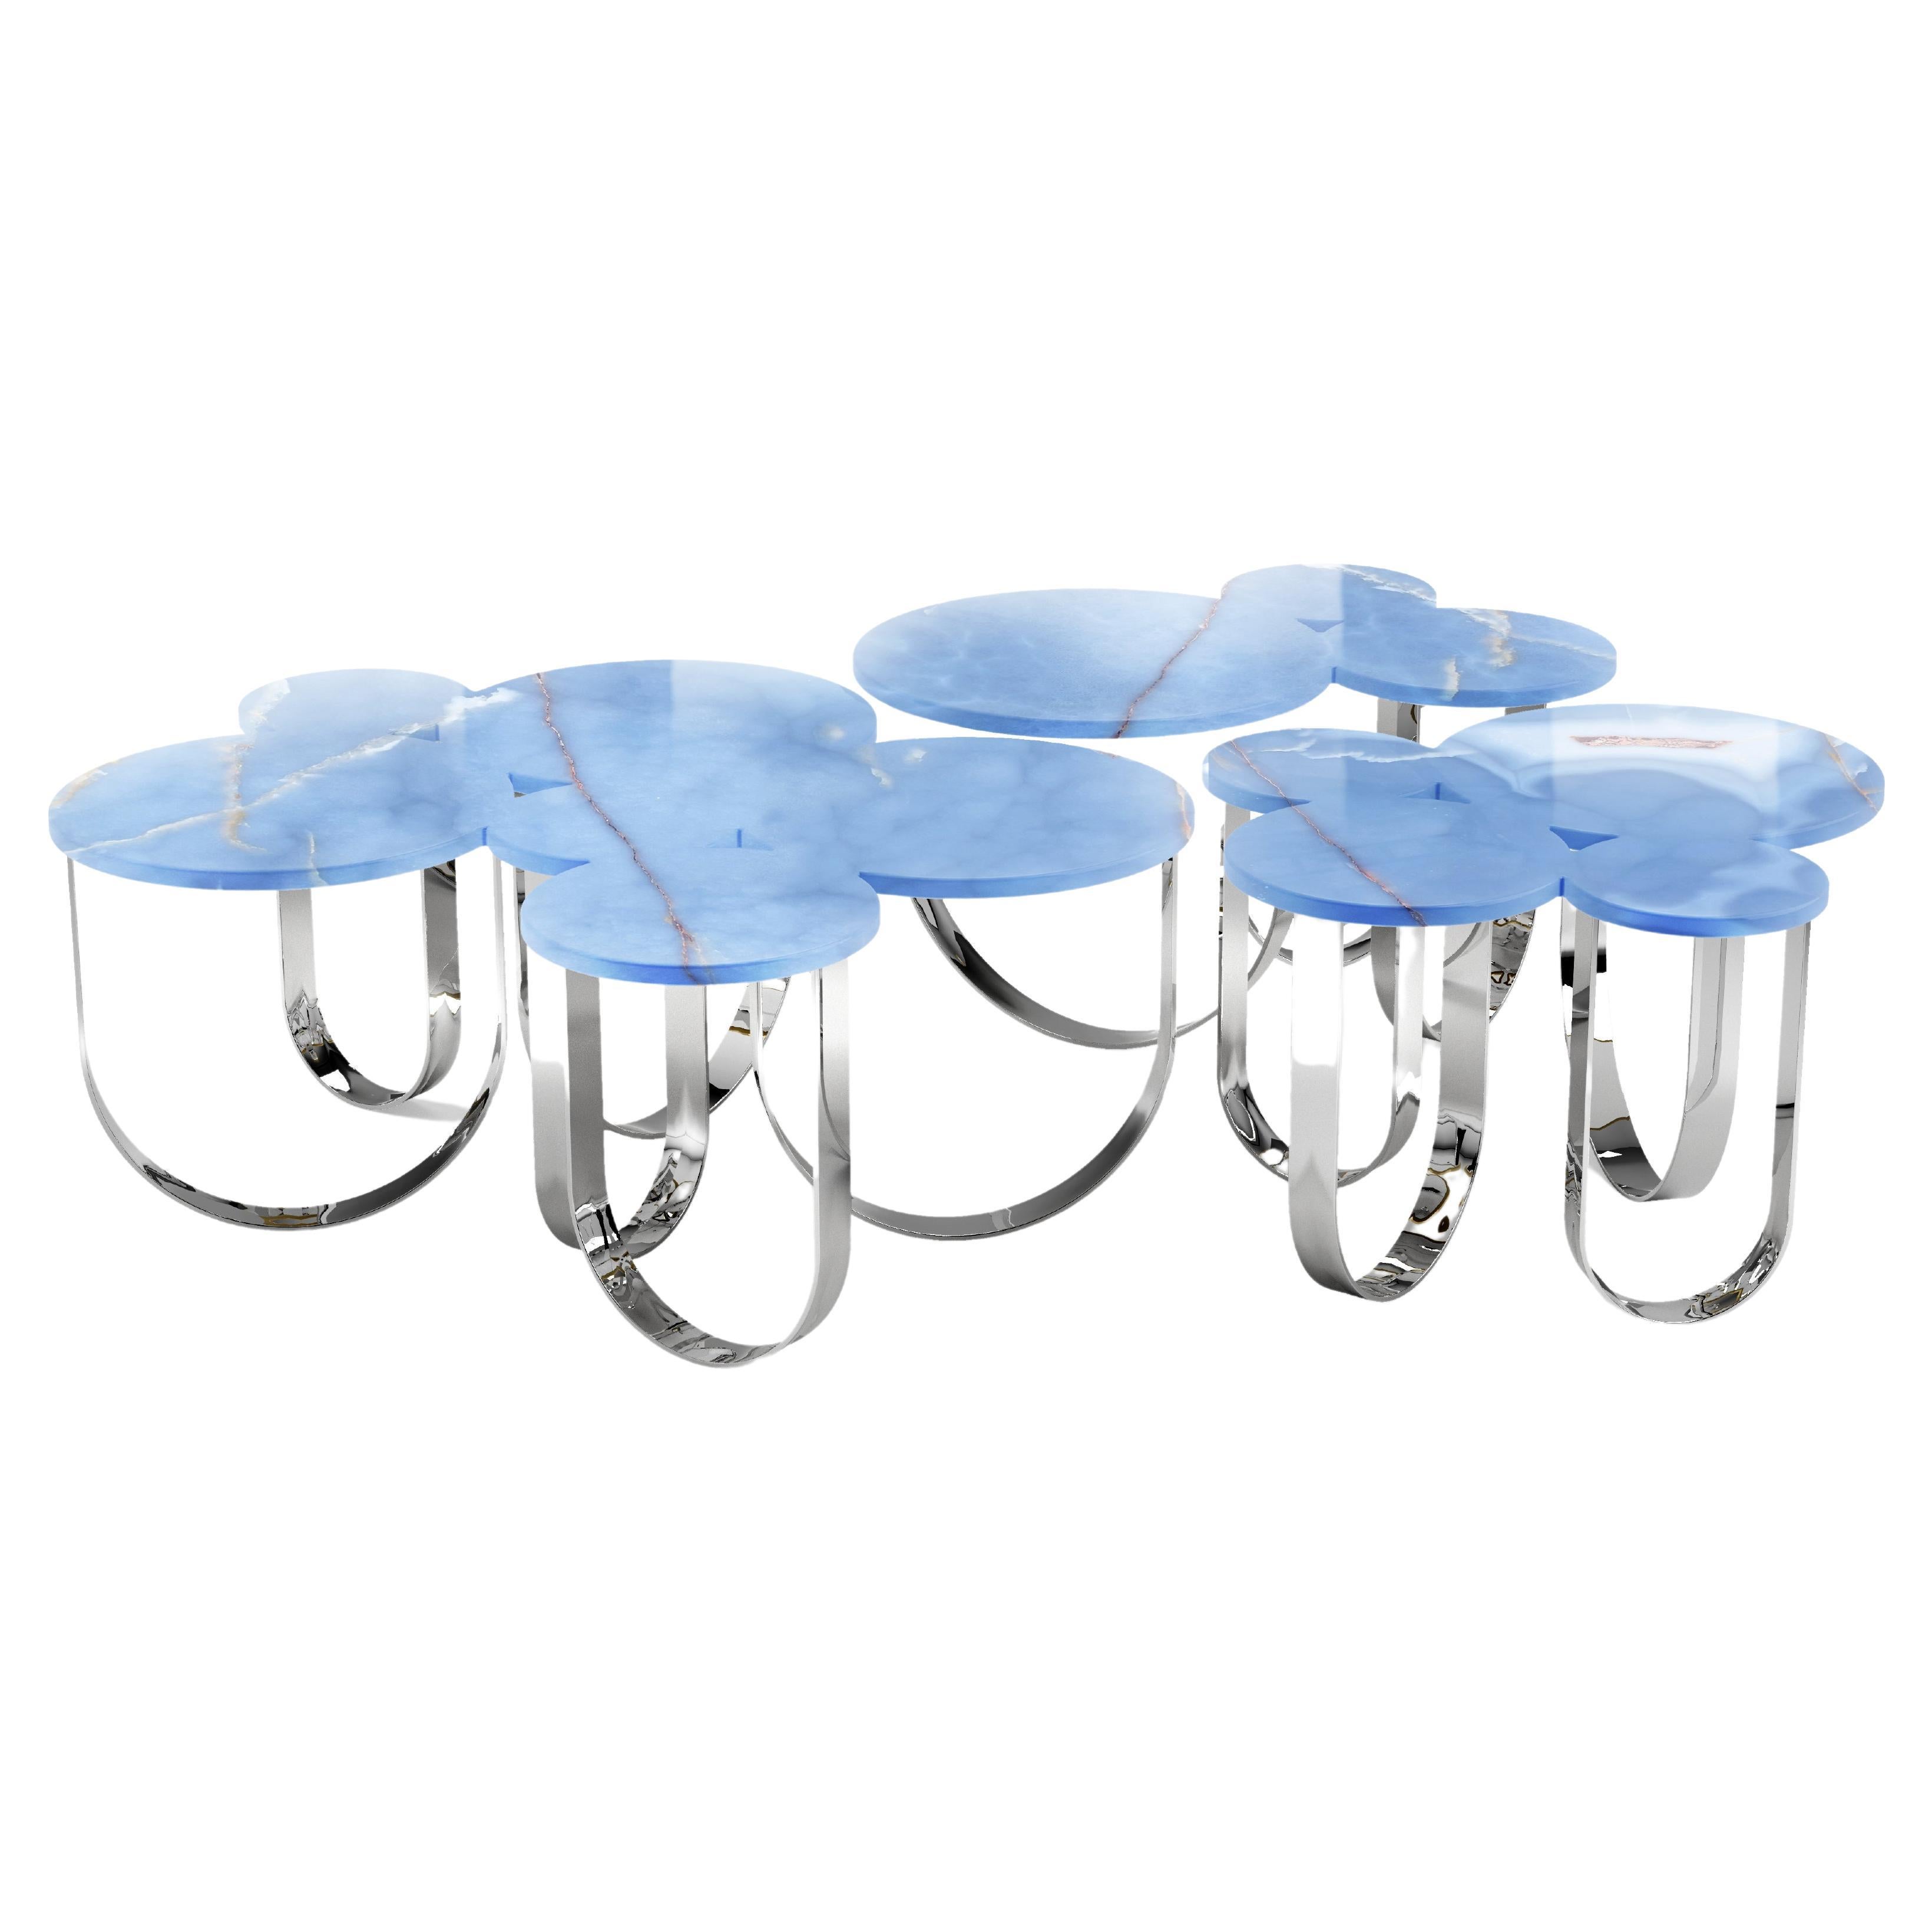 Coffee Center Composition Cocktail Table Blue Onyx Mirror Steel Metal Base Rings